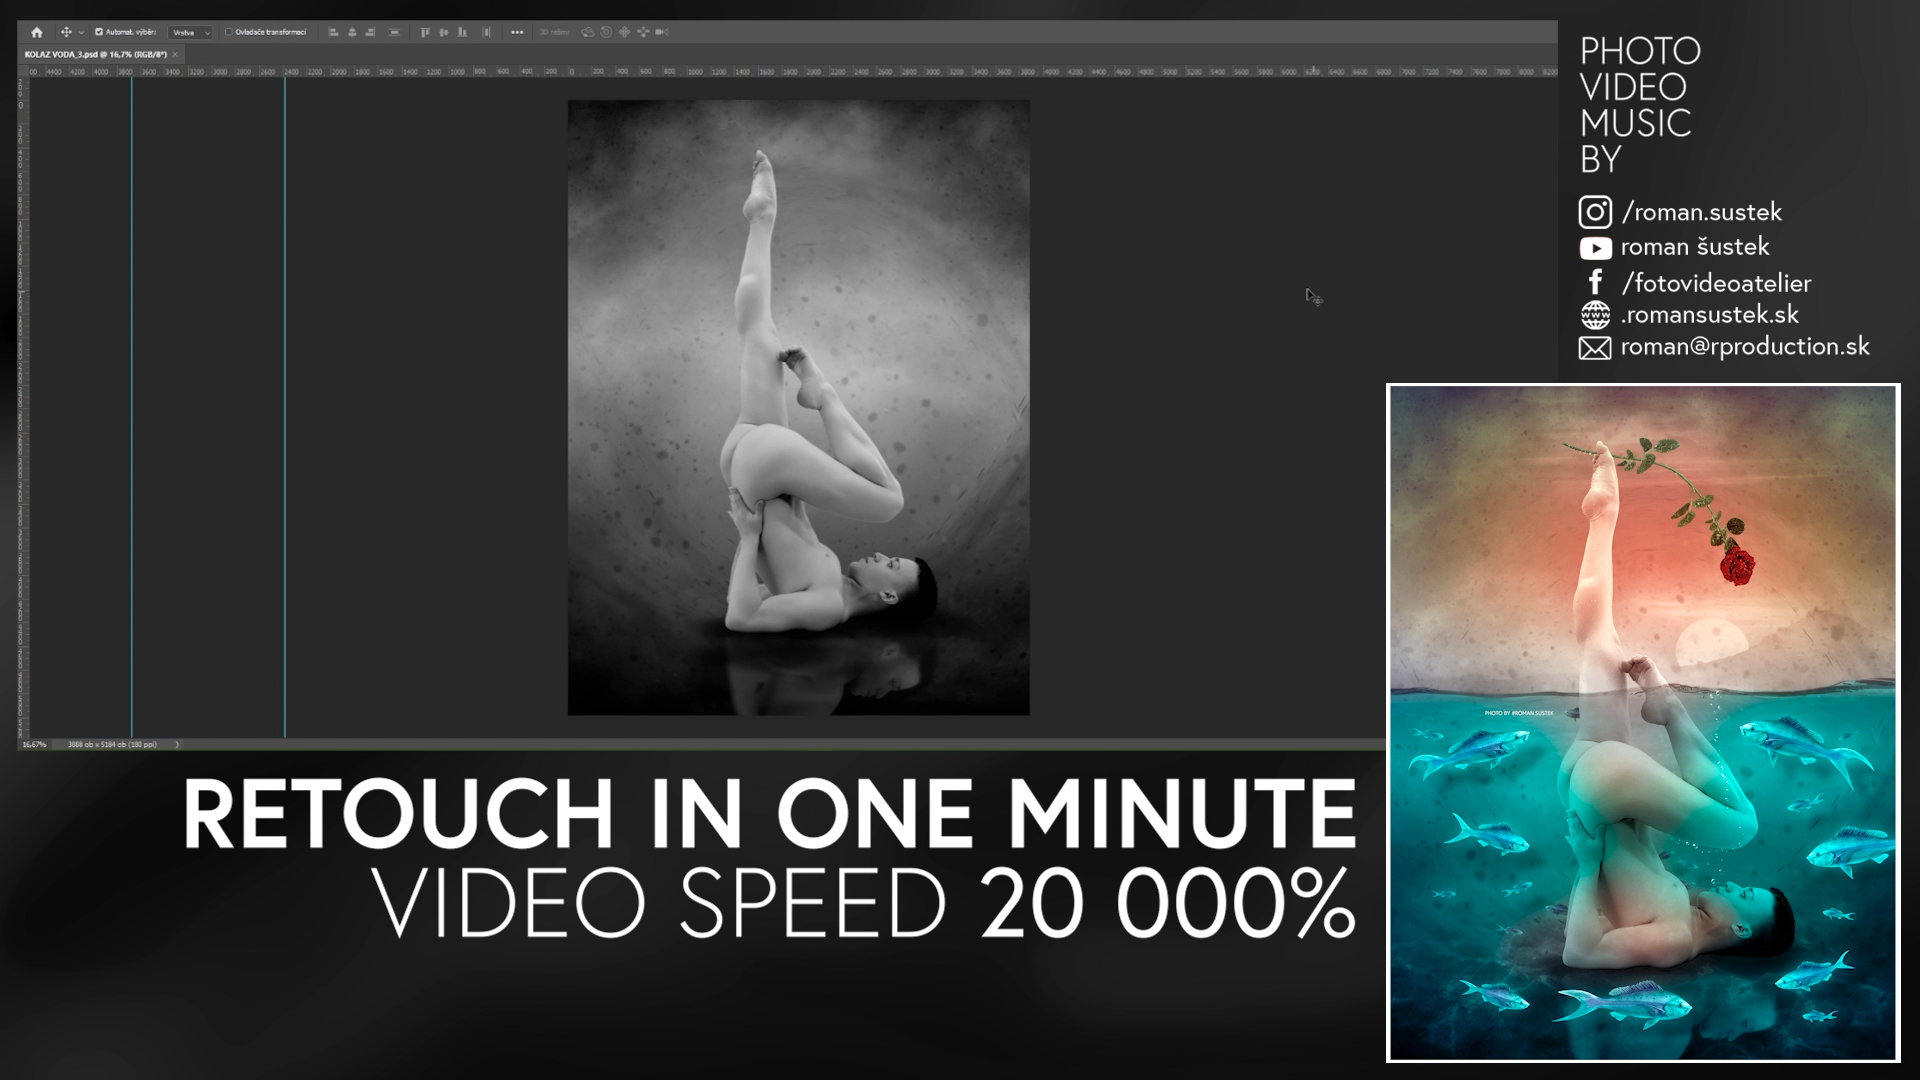 tribute enjoy the silence retouch photo collage with ballet dancer from Slovakia, 20 000% video speed, retouch in one minute